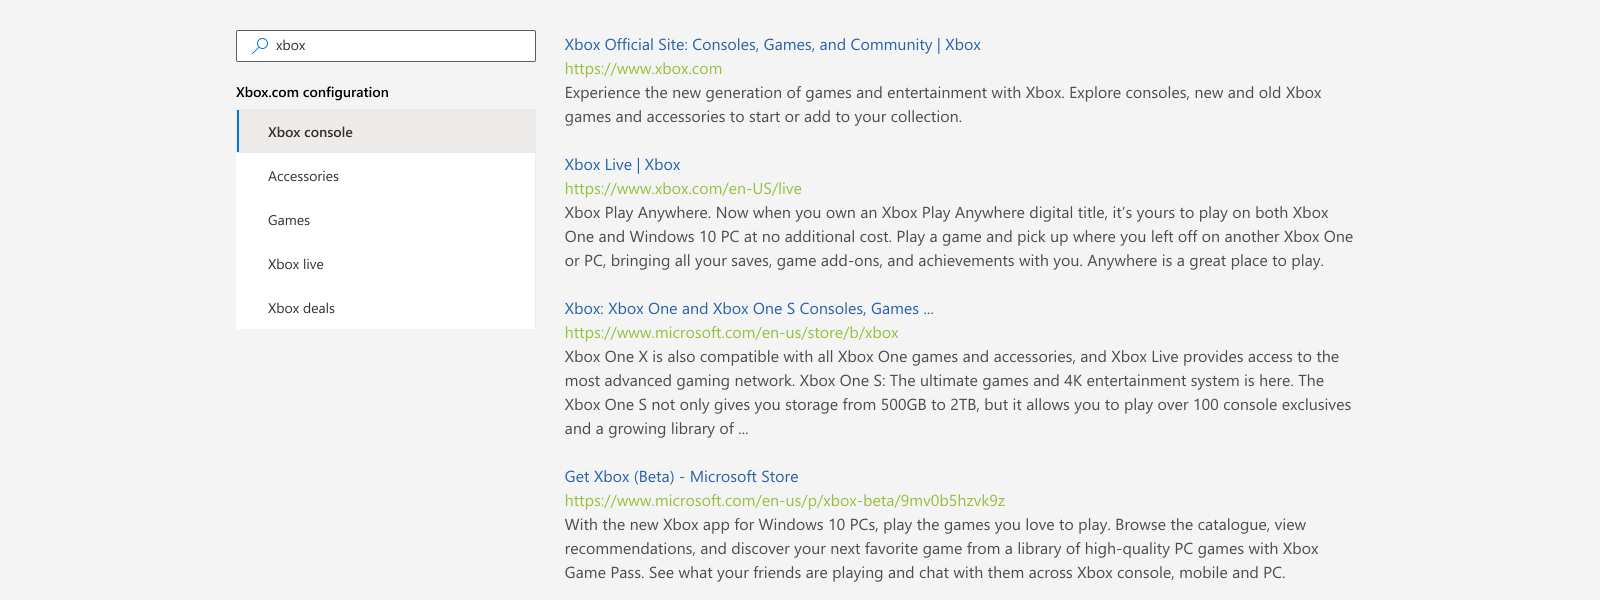 Illustration of search experience on xbox.com domain.